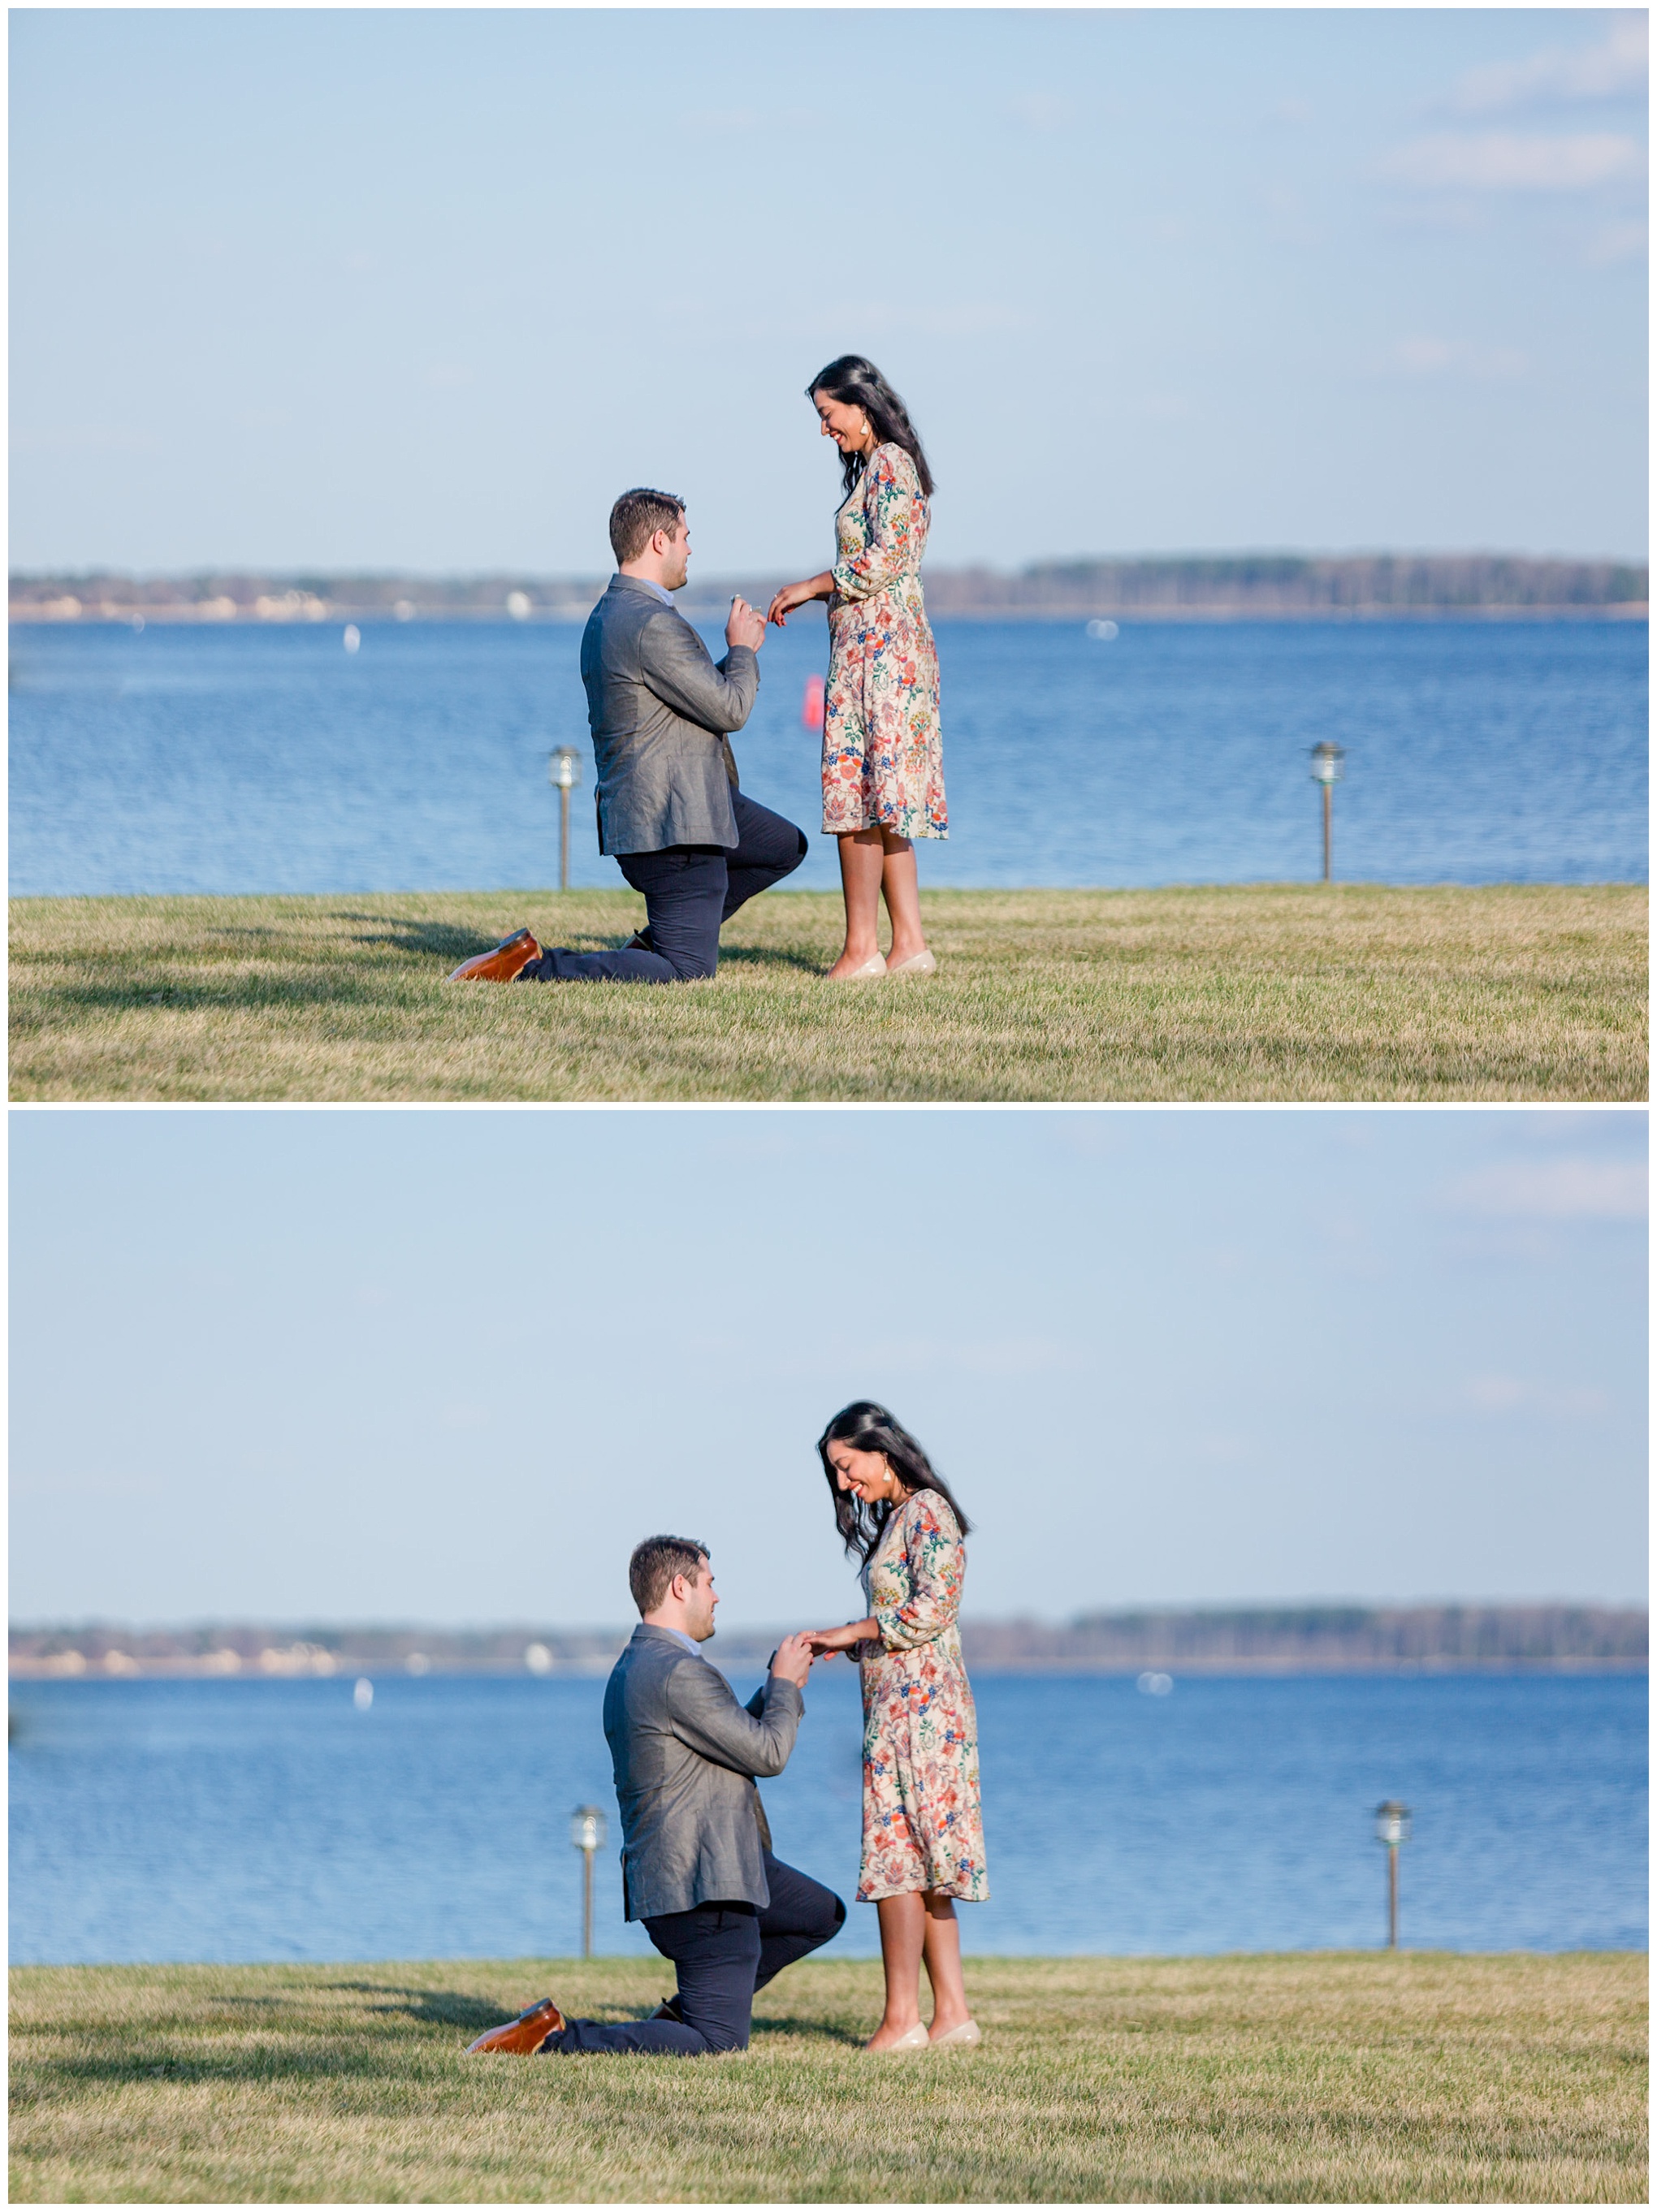 St. Michaels surprise proposal, Inn at Perry Cabin, waterfront proposal, surprise proposal, marriage proposal, Maryland waterfront, Maryland eastern shore, spring marriage proposal, floral dress, grey blazer, St. Michaels, down on one knee, on bended knee, proposing